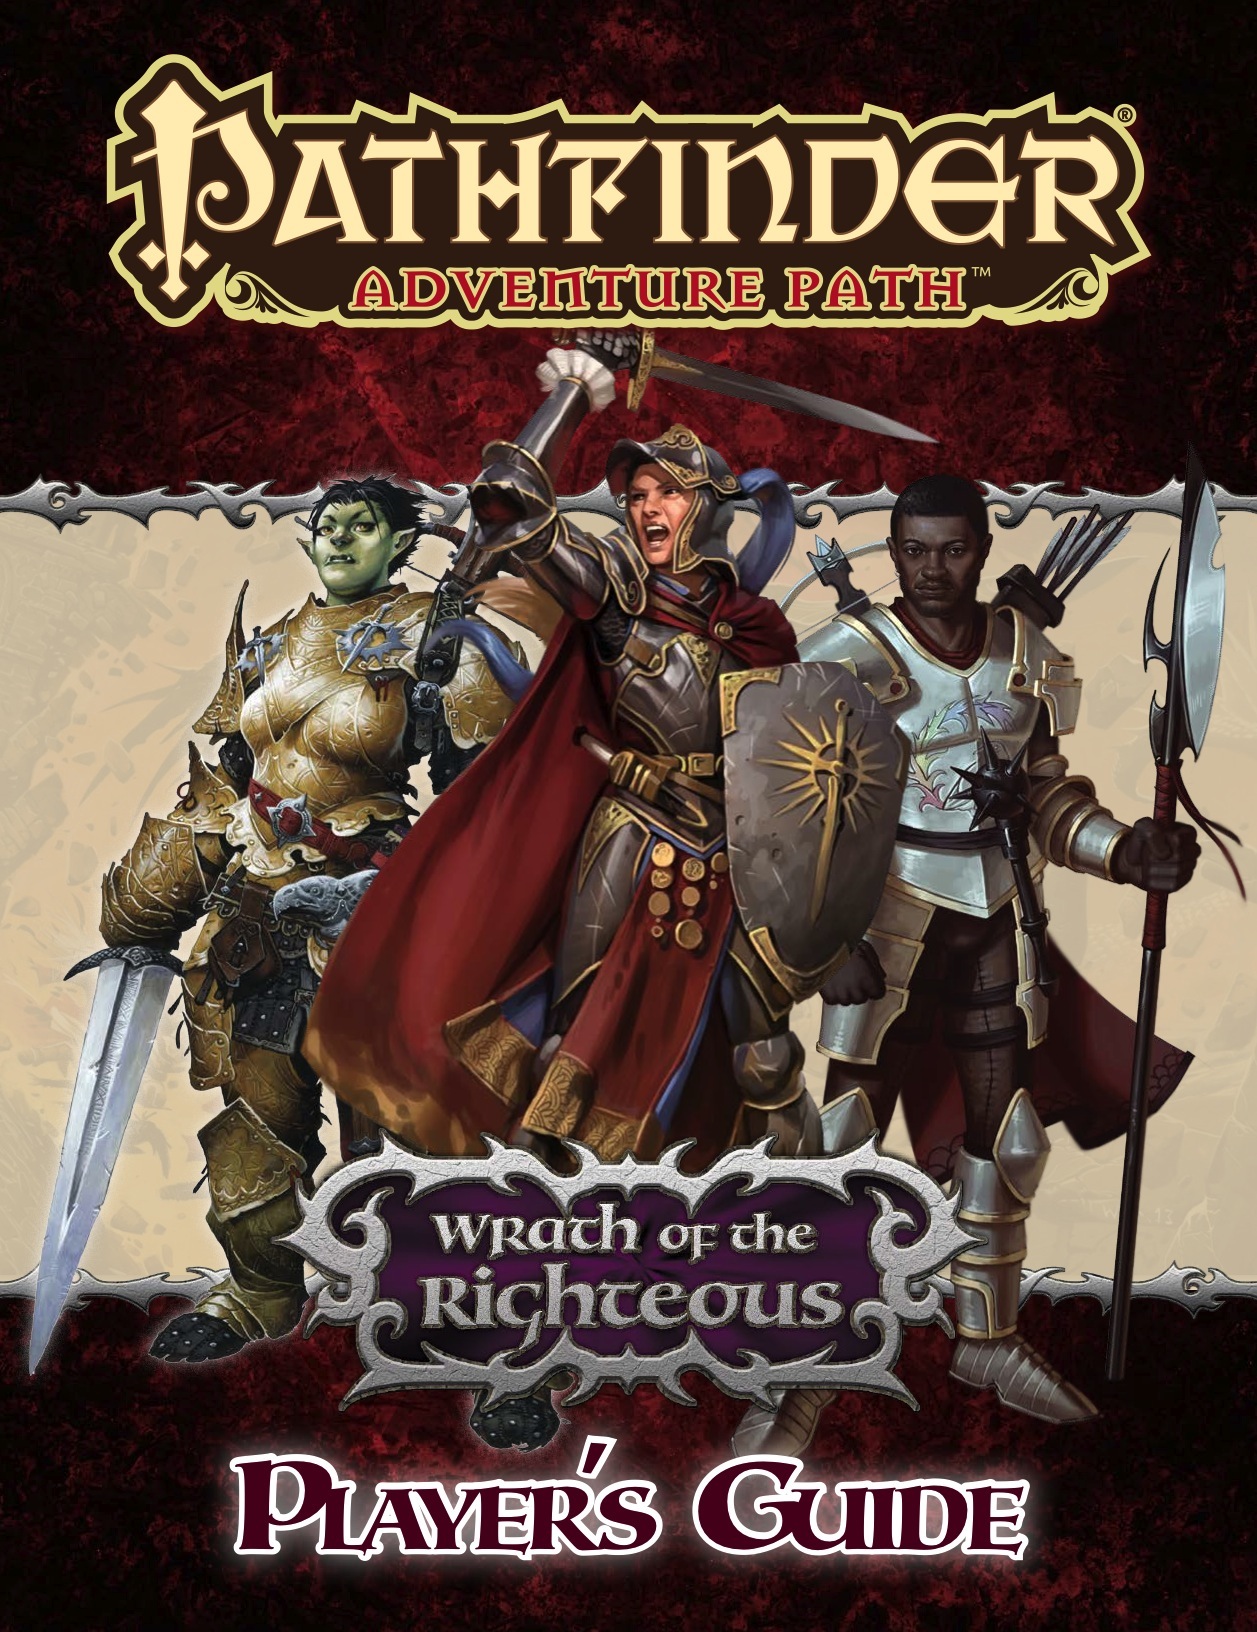 free download pathfinder wrath of the righteous guide